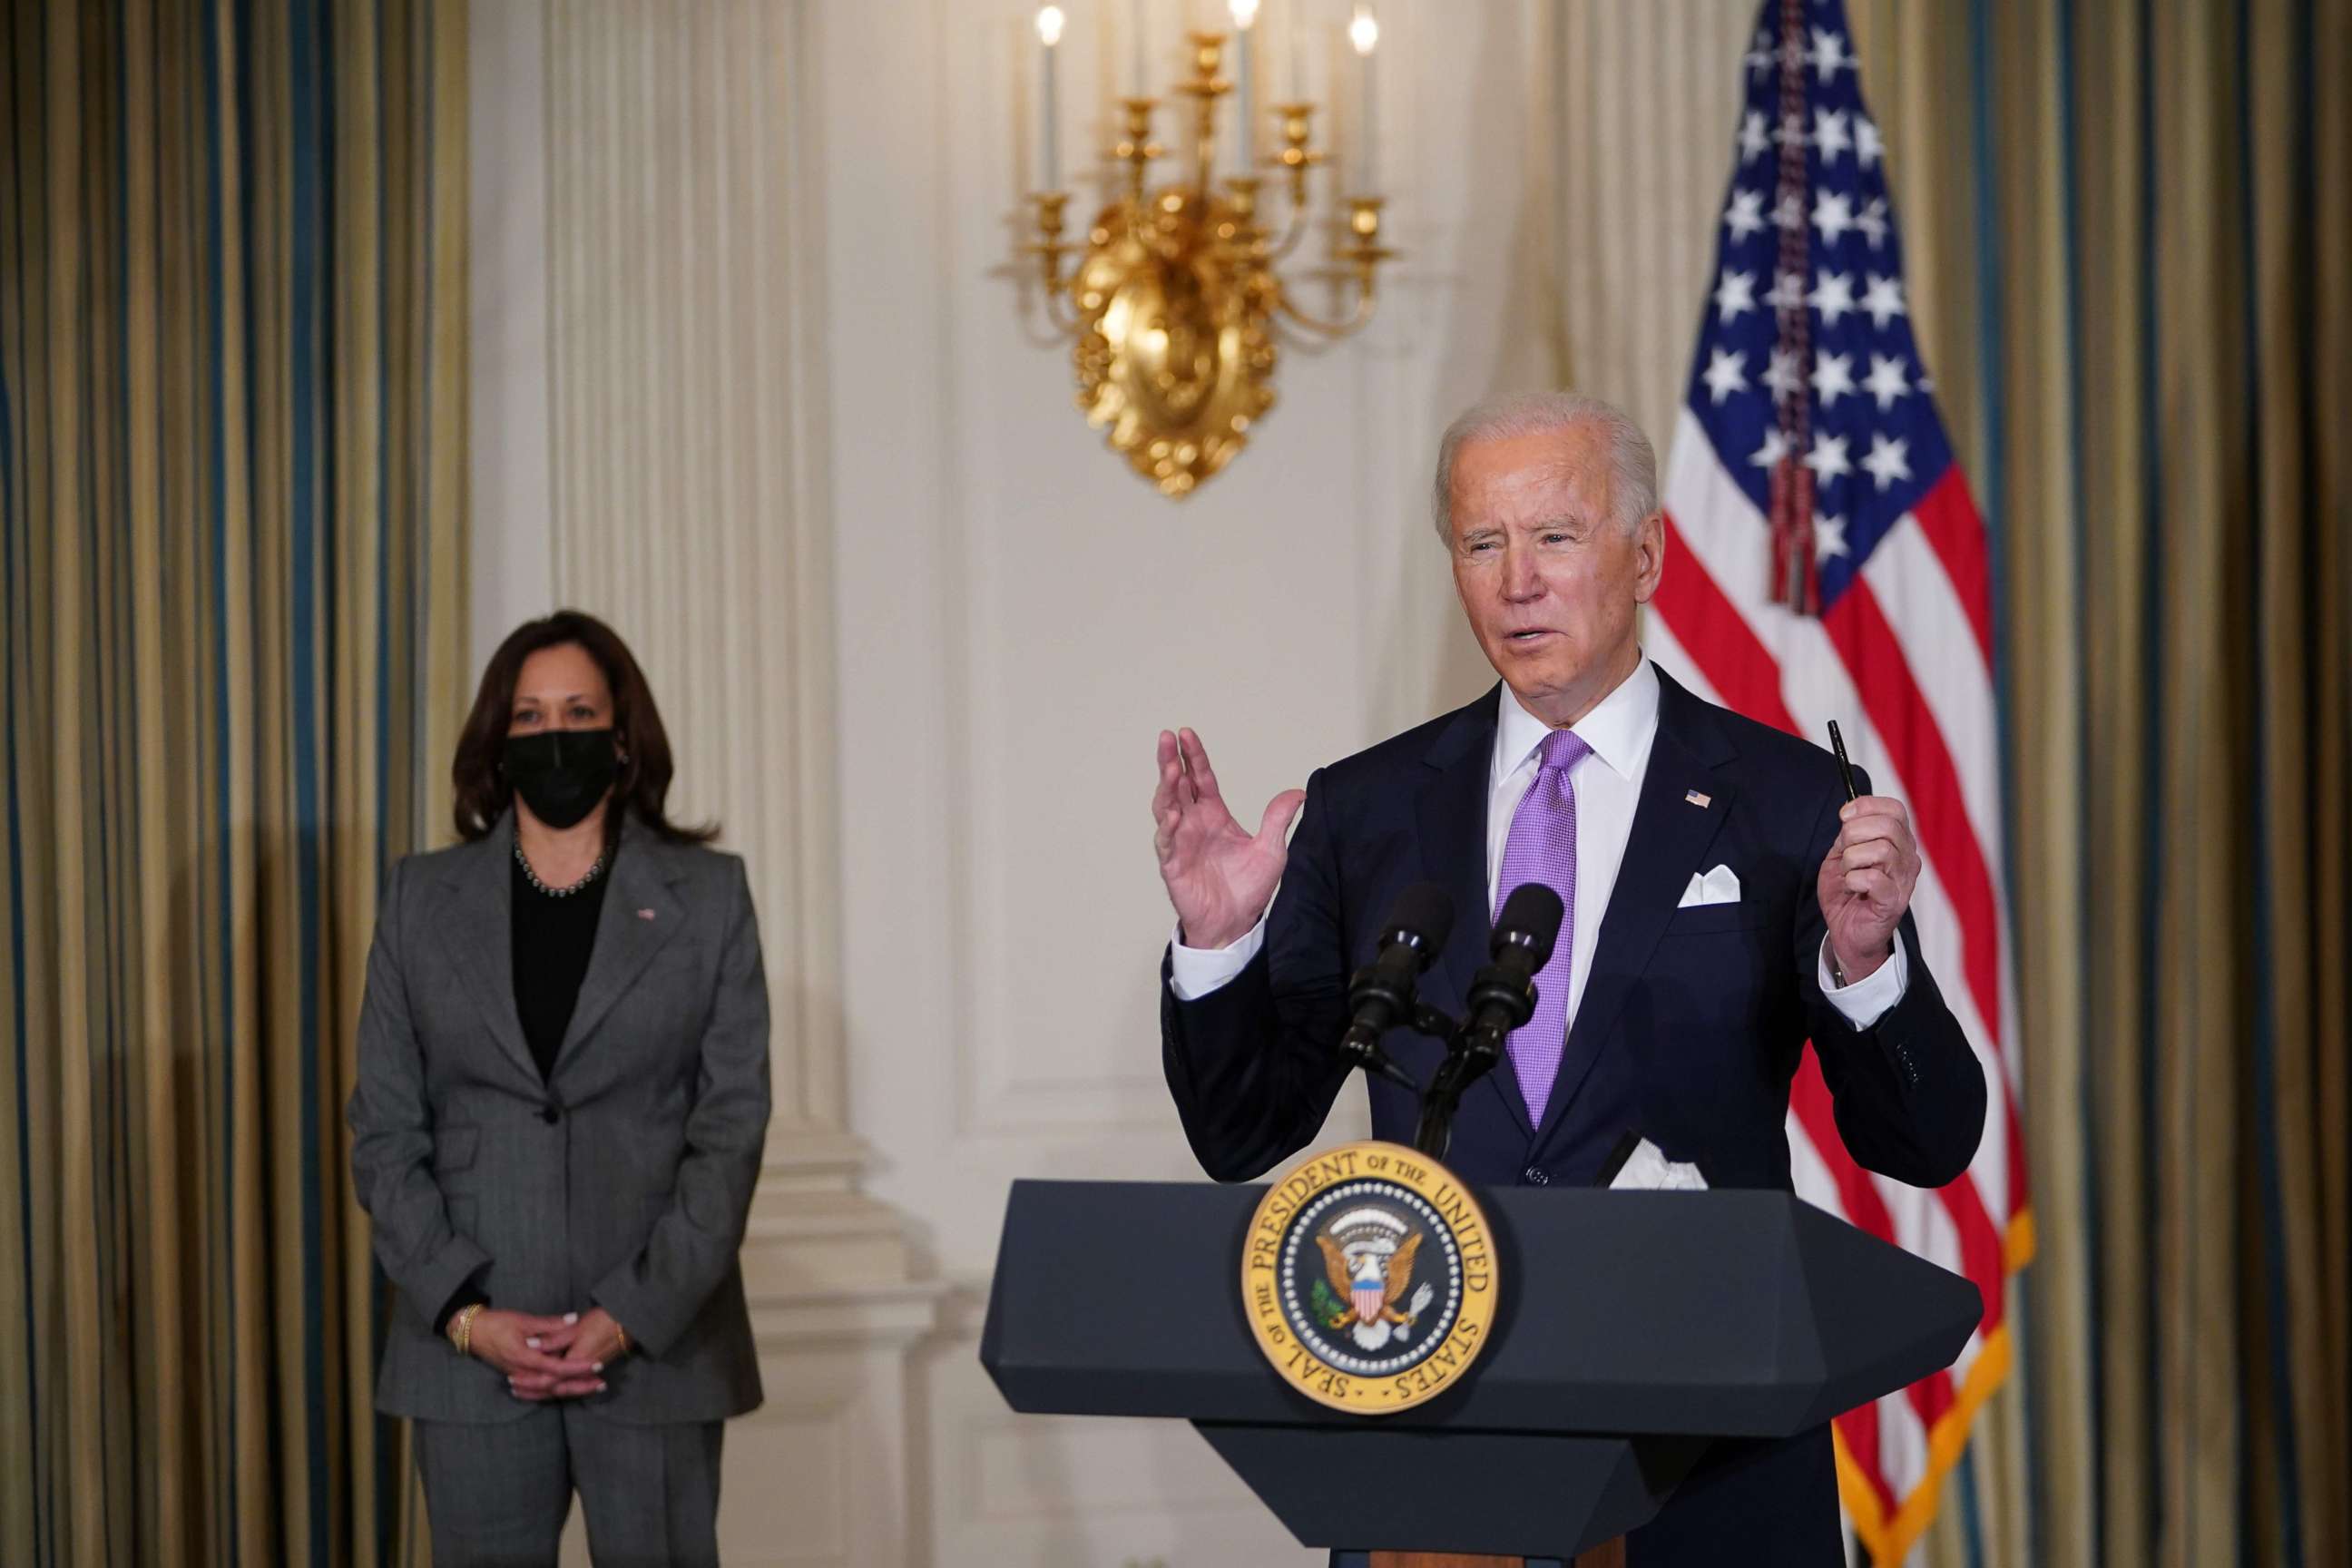 PHOTO: President Joe Biden arrives to speak on racial equity with Vice President Kamala Harris before signing executive orders in the State Dining Room of the White House in Washington, DC, Jan. 26, 2021.